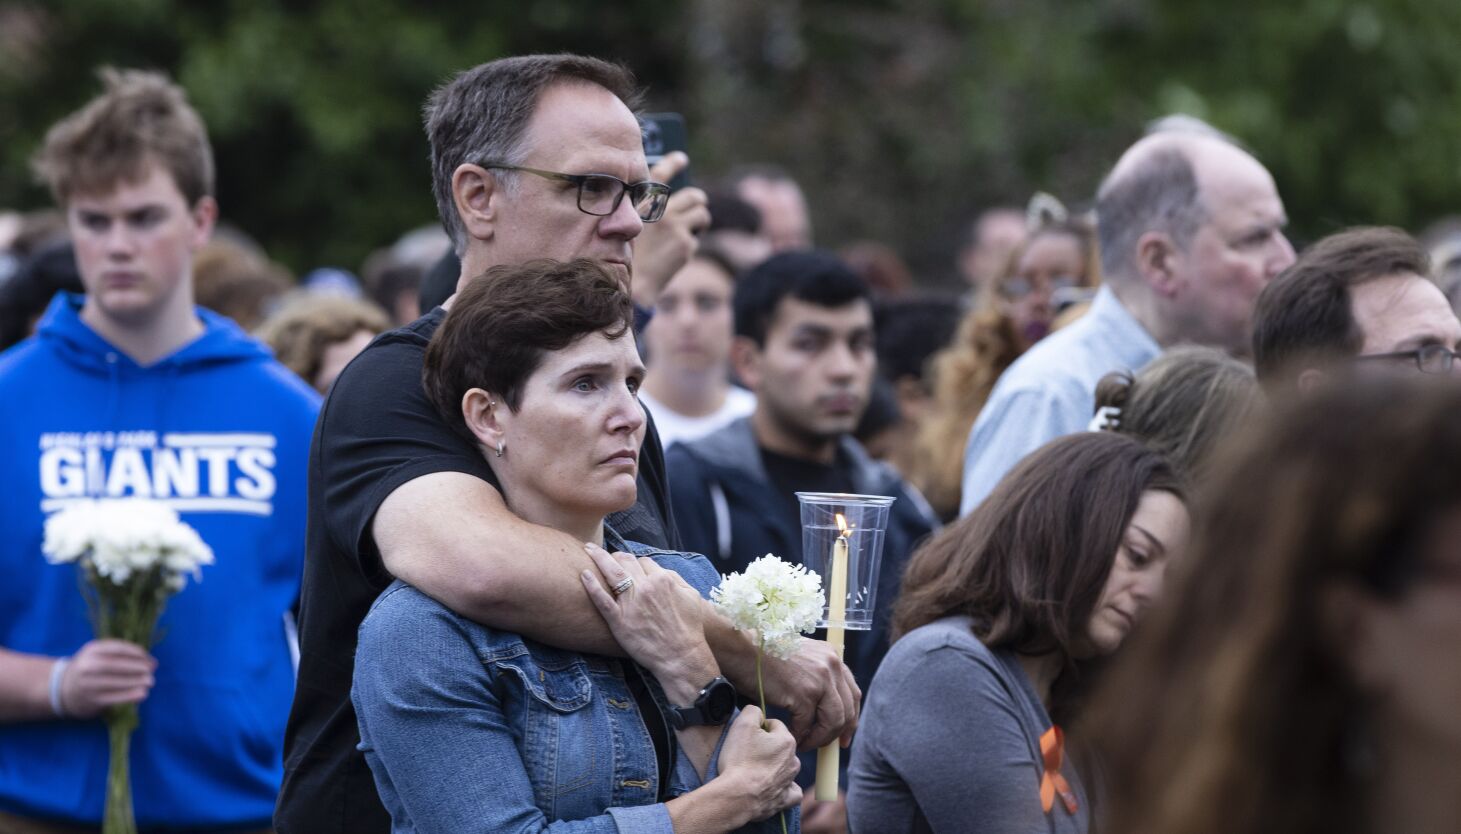   
																‘A place of healing’: Highwood hosts memorial for ‘sister city’ after mass shooting 
															 